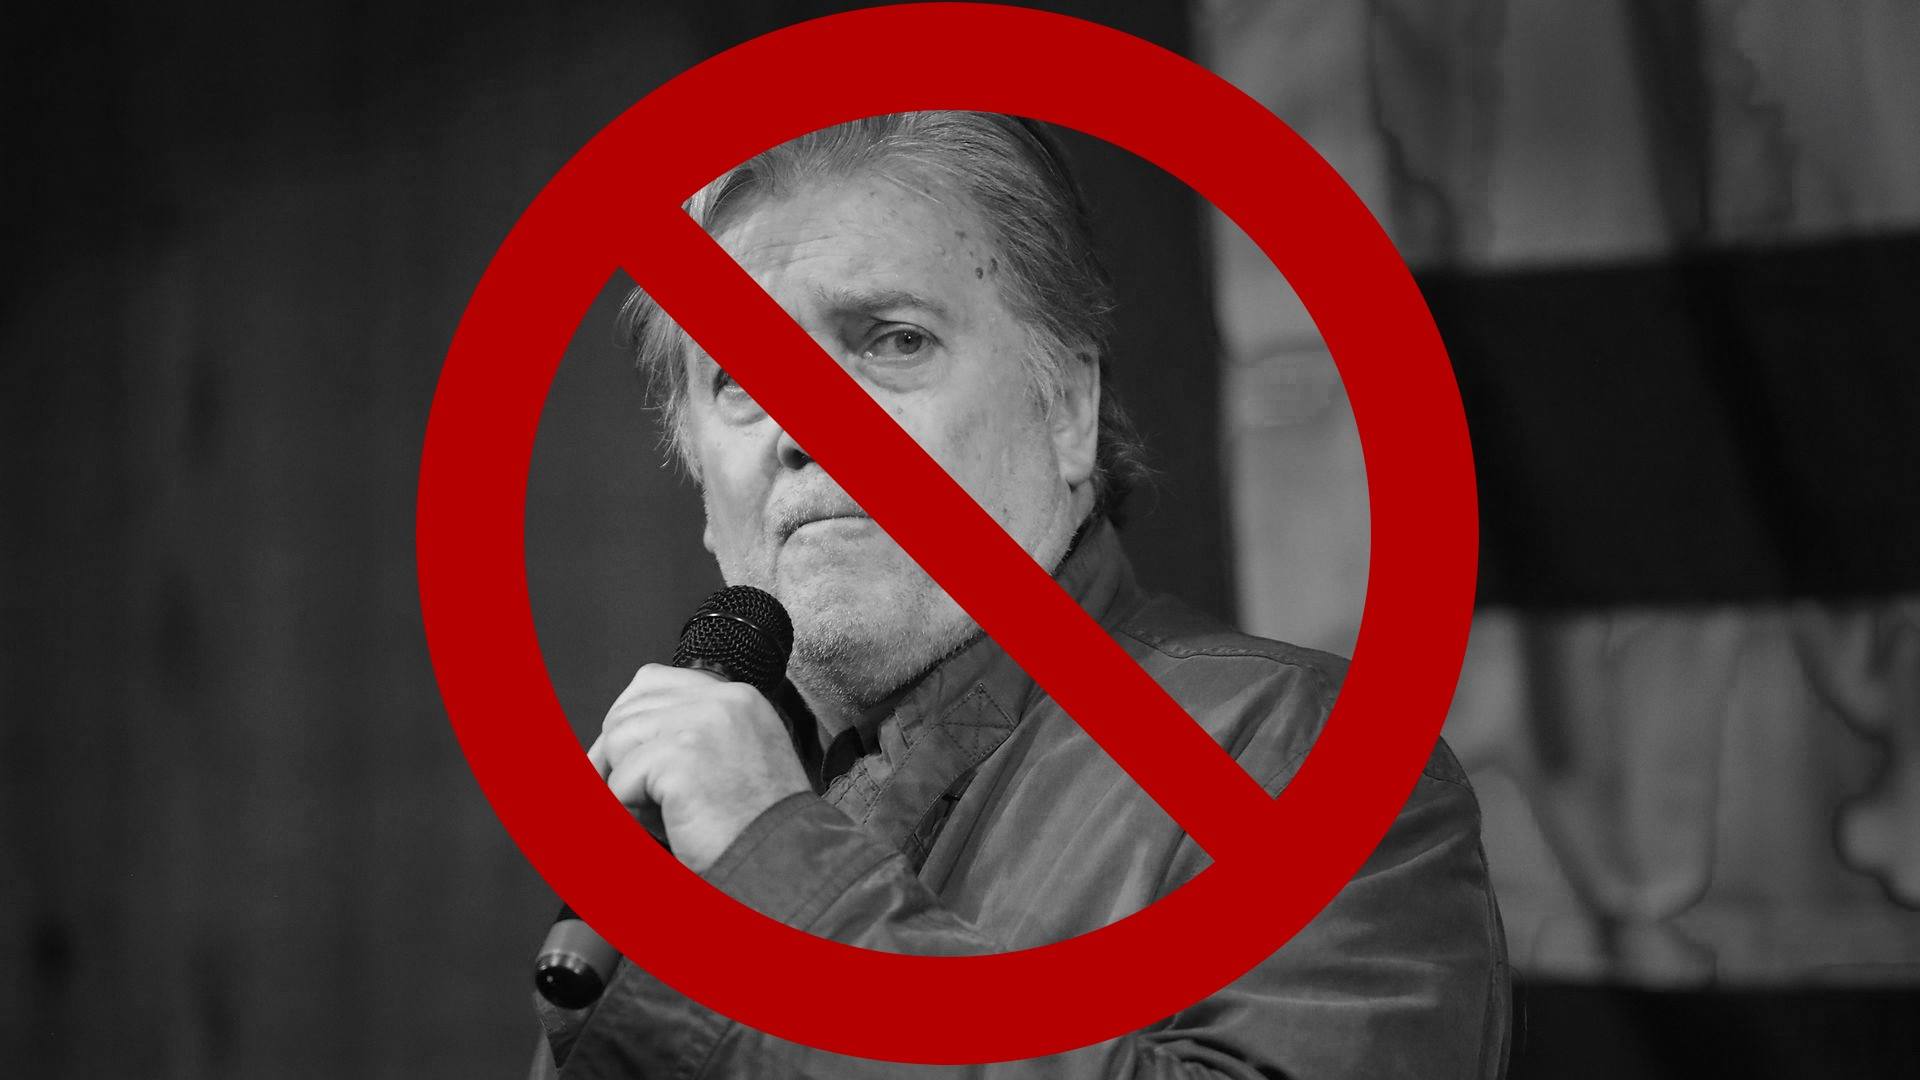 Image of Steve Bannon with a red circle with a slash through it superimposed on top.